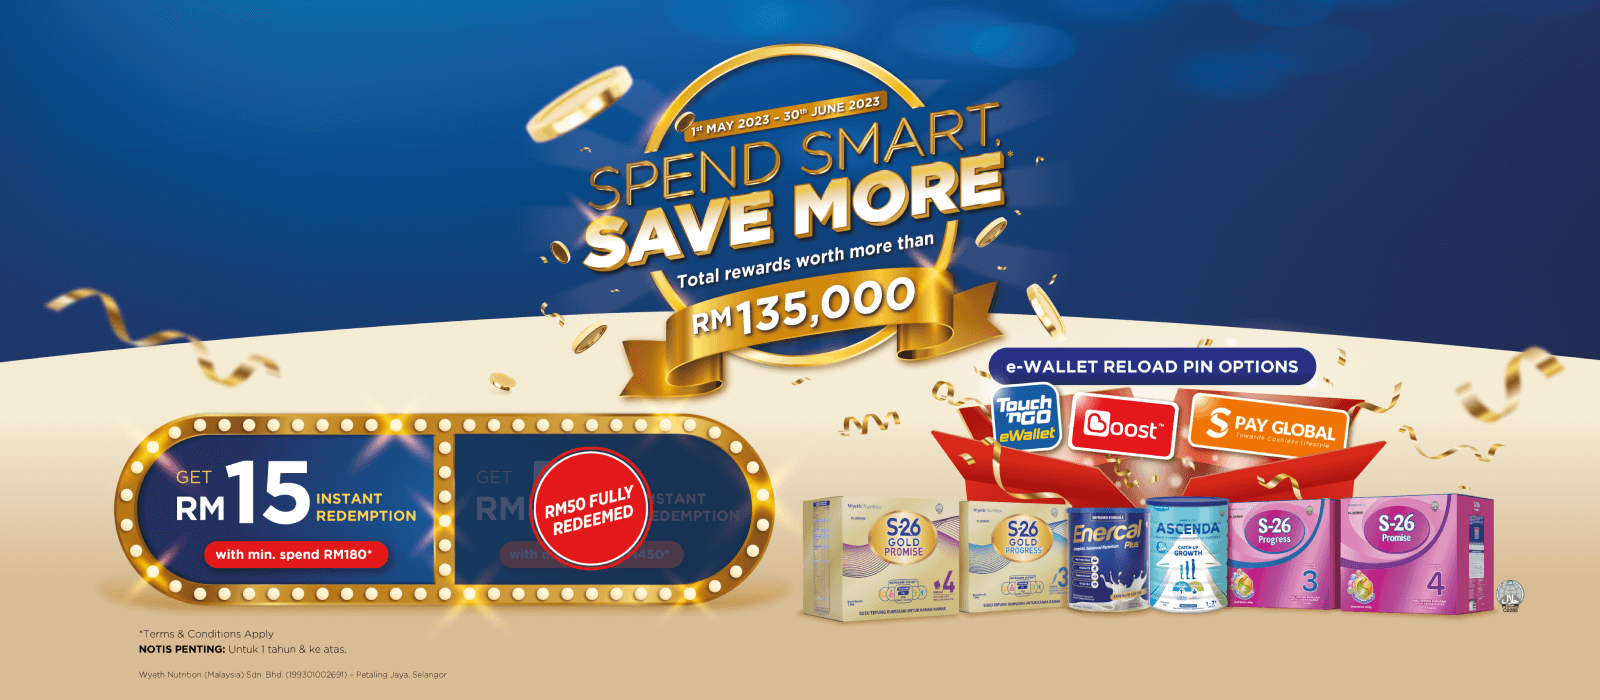 spend-smart-save-more-banner